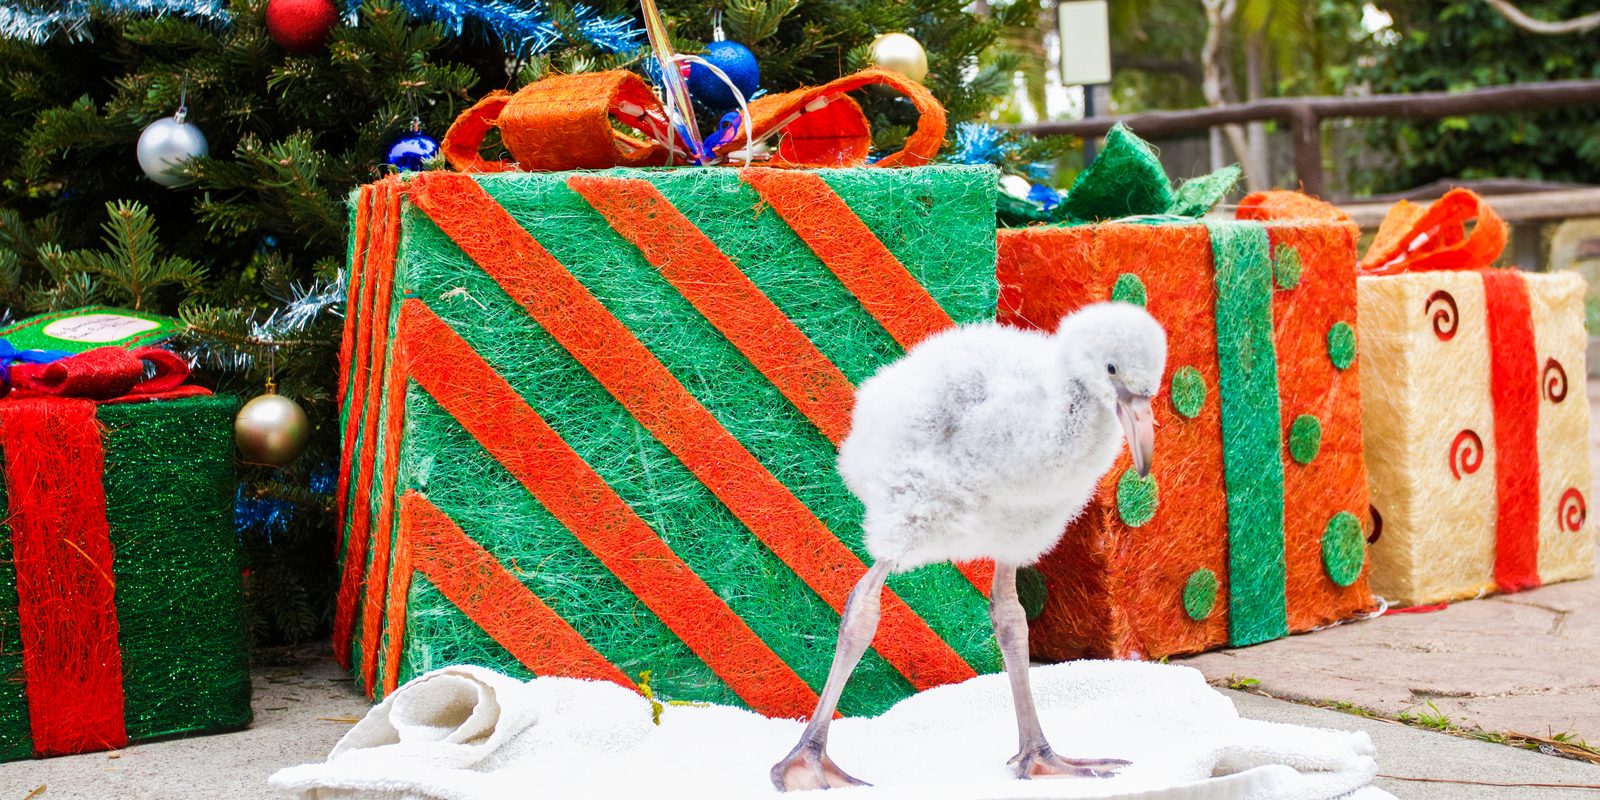 flamingo chick stands in front of Christmas presents